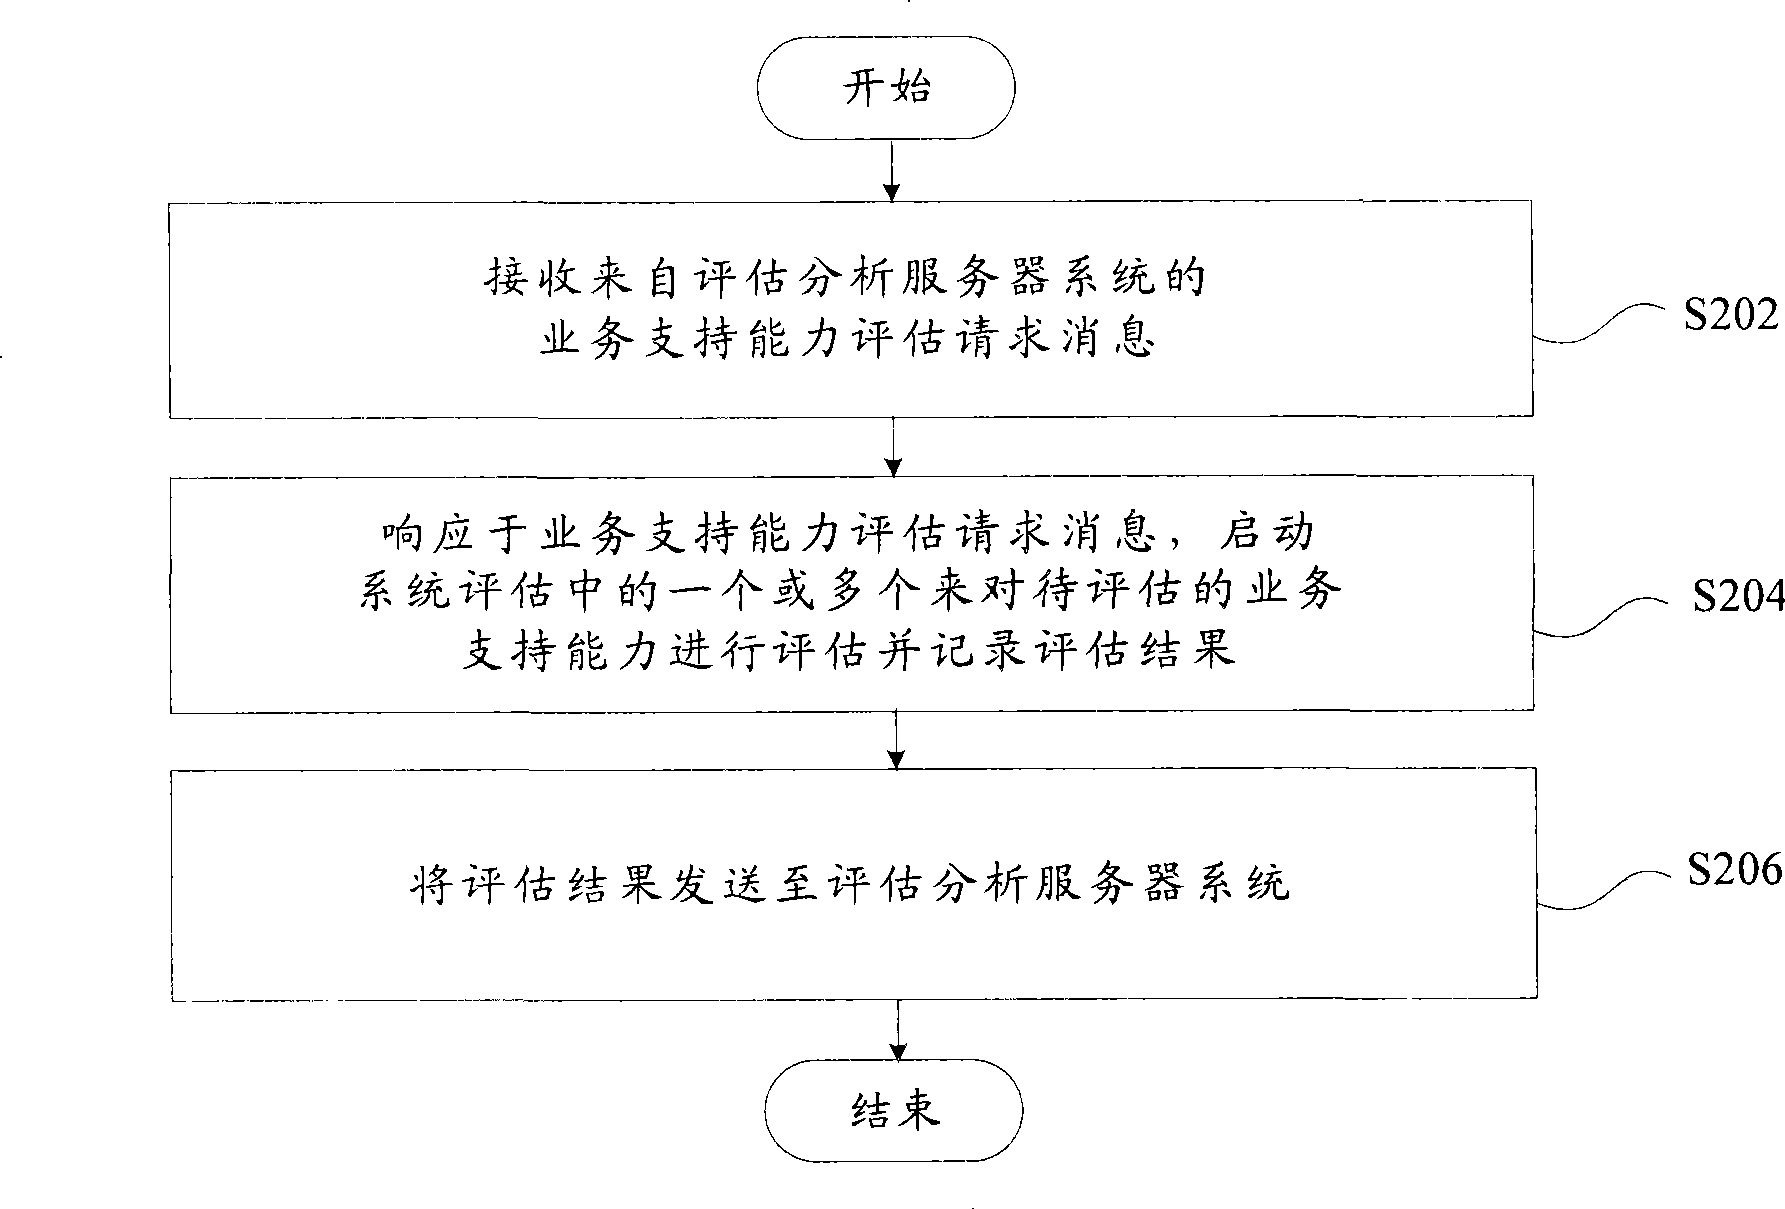 System and method for evaluating and analyzing mobile terminal business supporting capacity